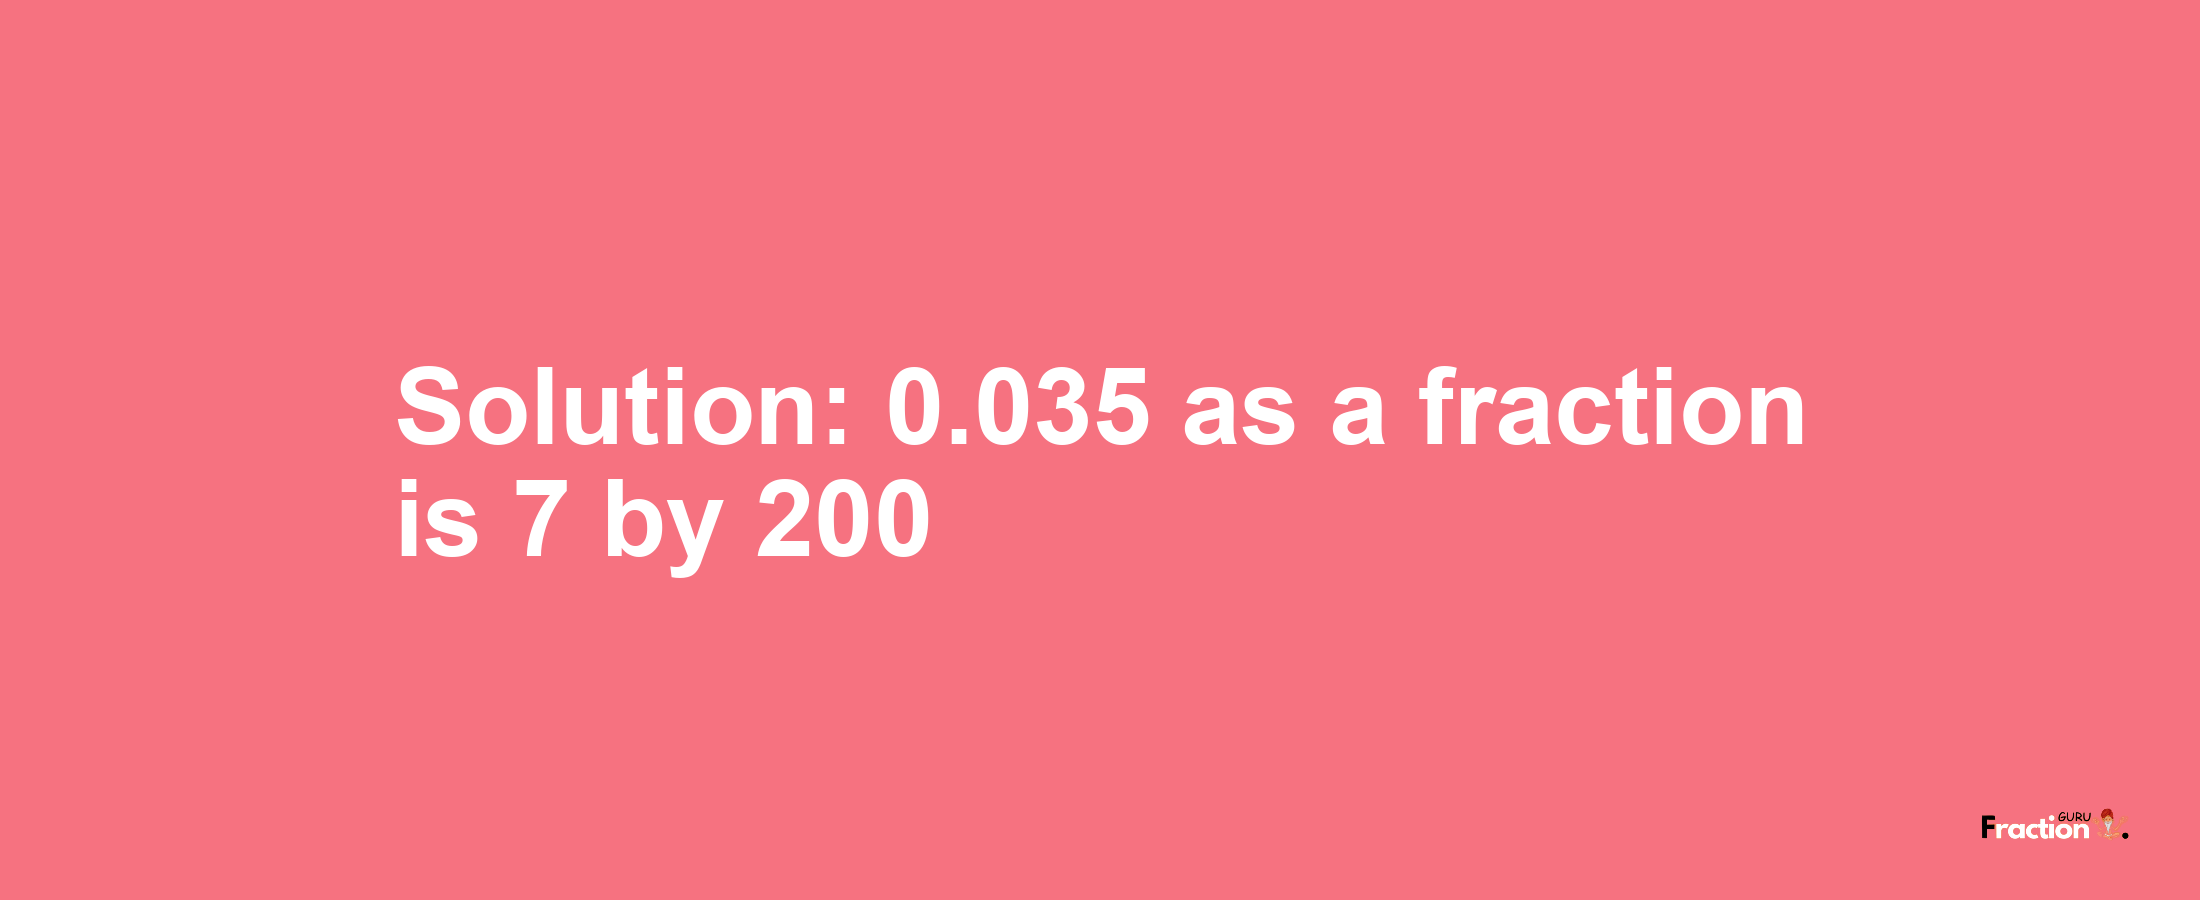 Solution:0.035 as a fraction is 7/200